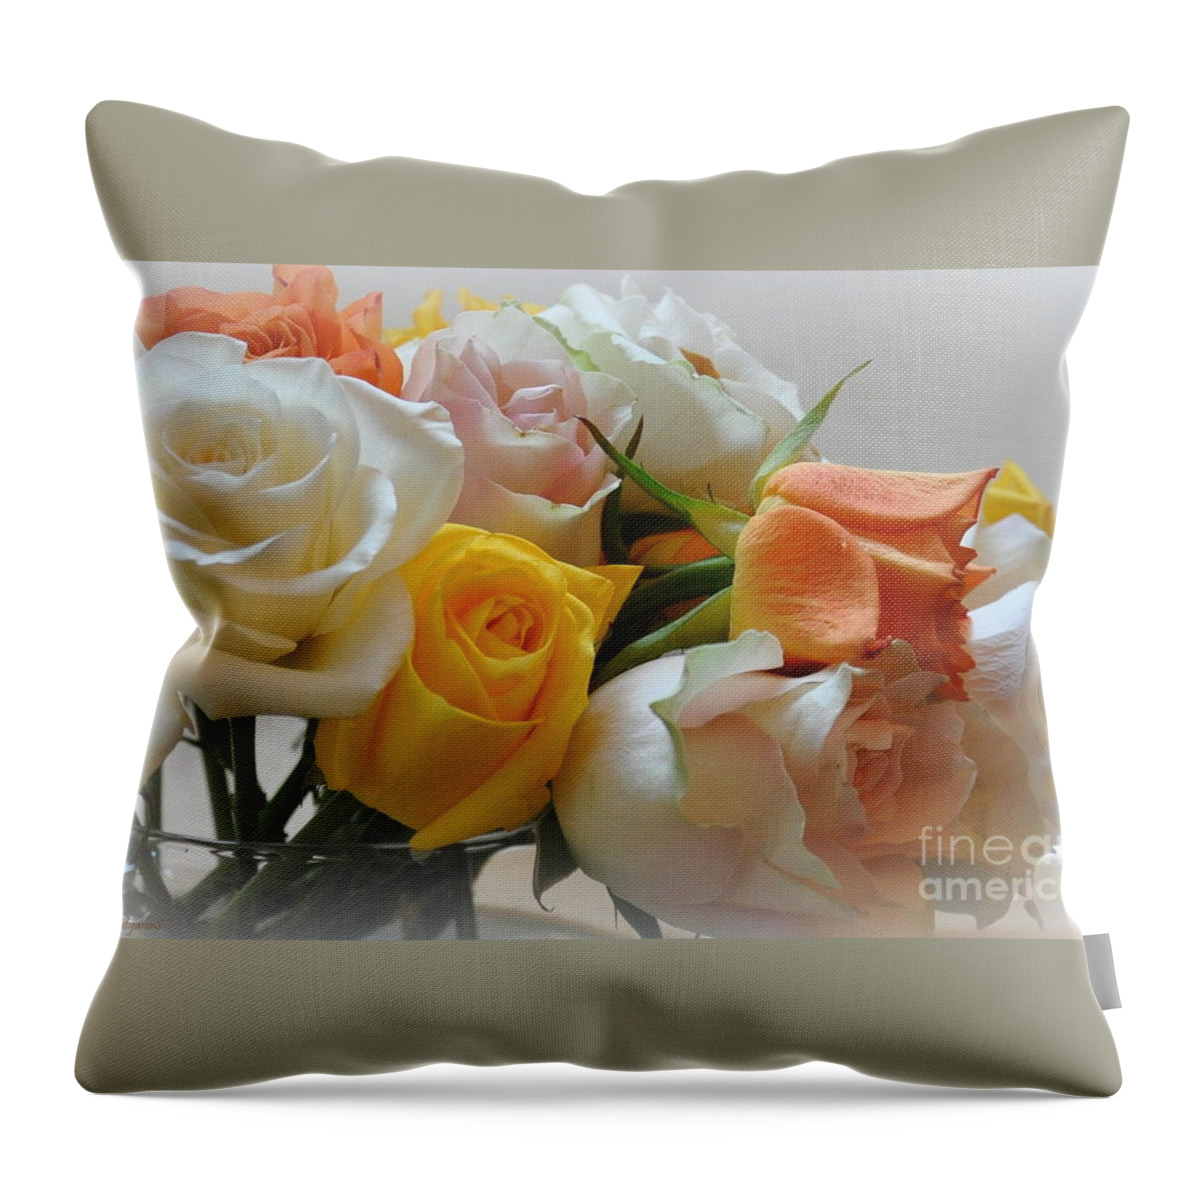 Floral Throw Pillow featuring the photograph Roses by Tatyana Searcy